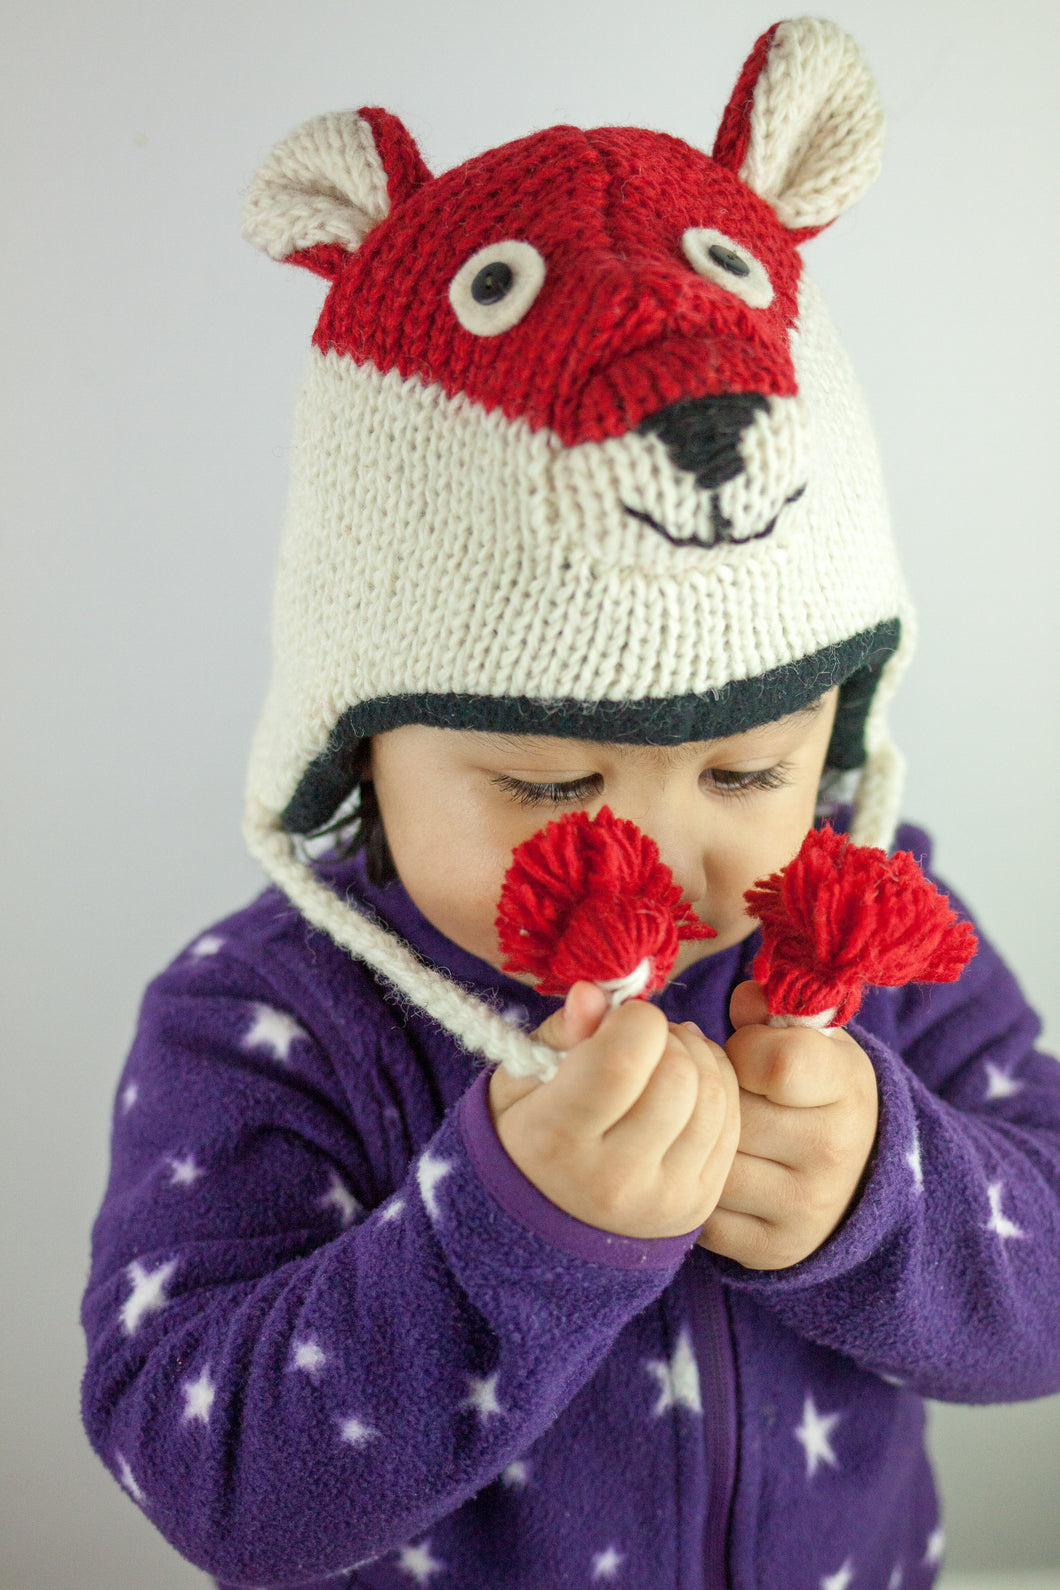 Hand Knitted Animal Design Woolen Hats - Toddlers